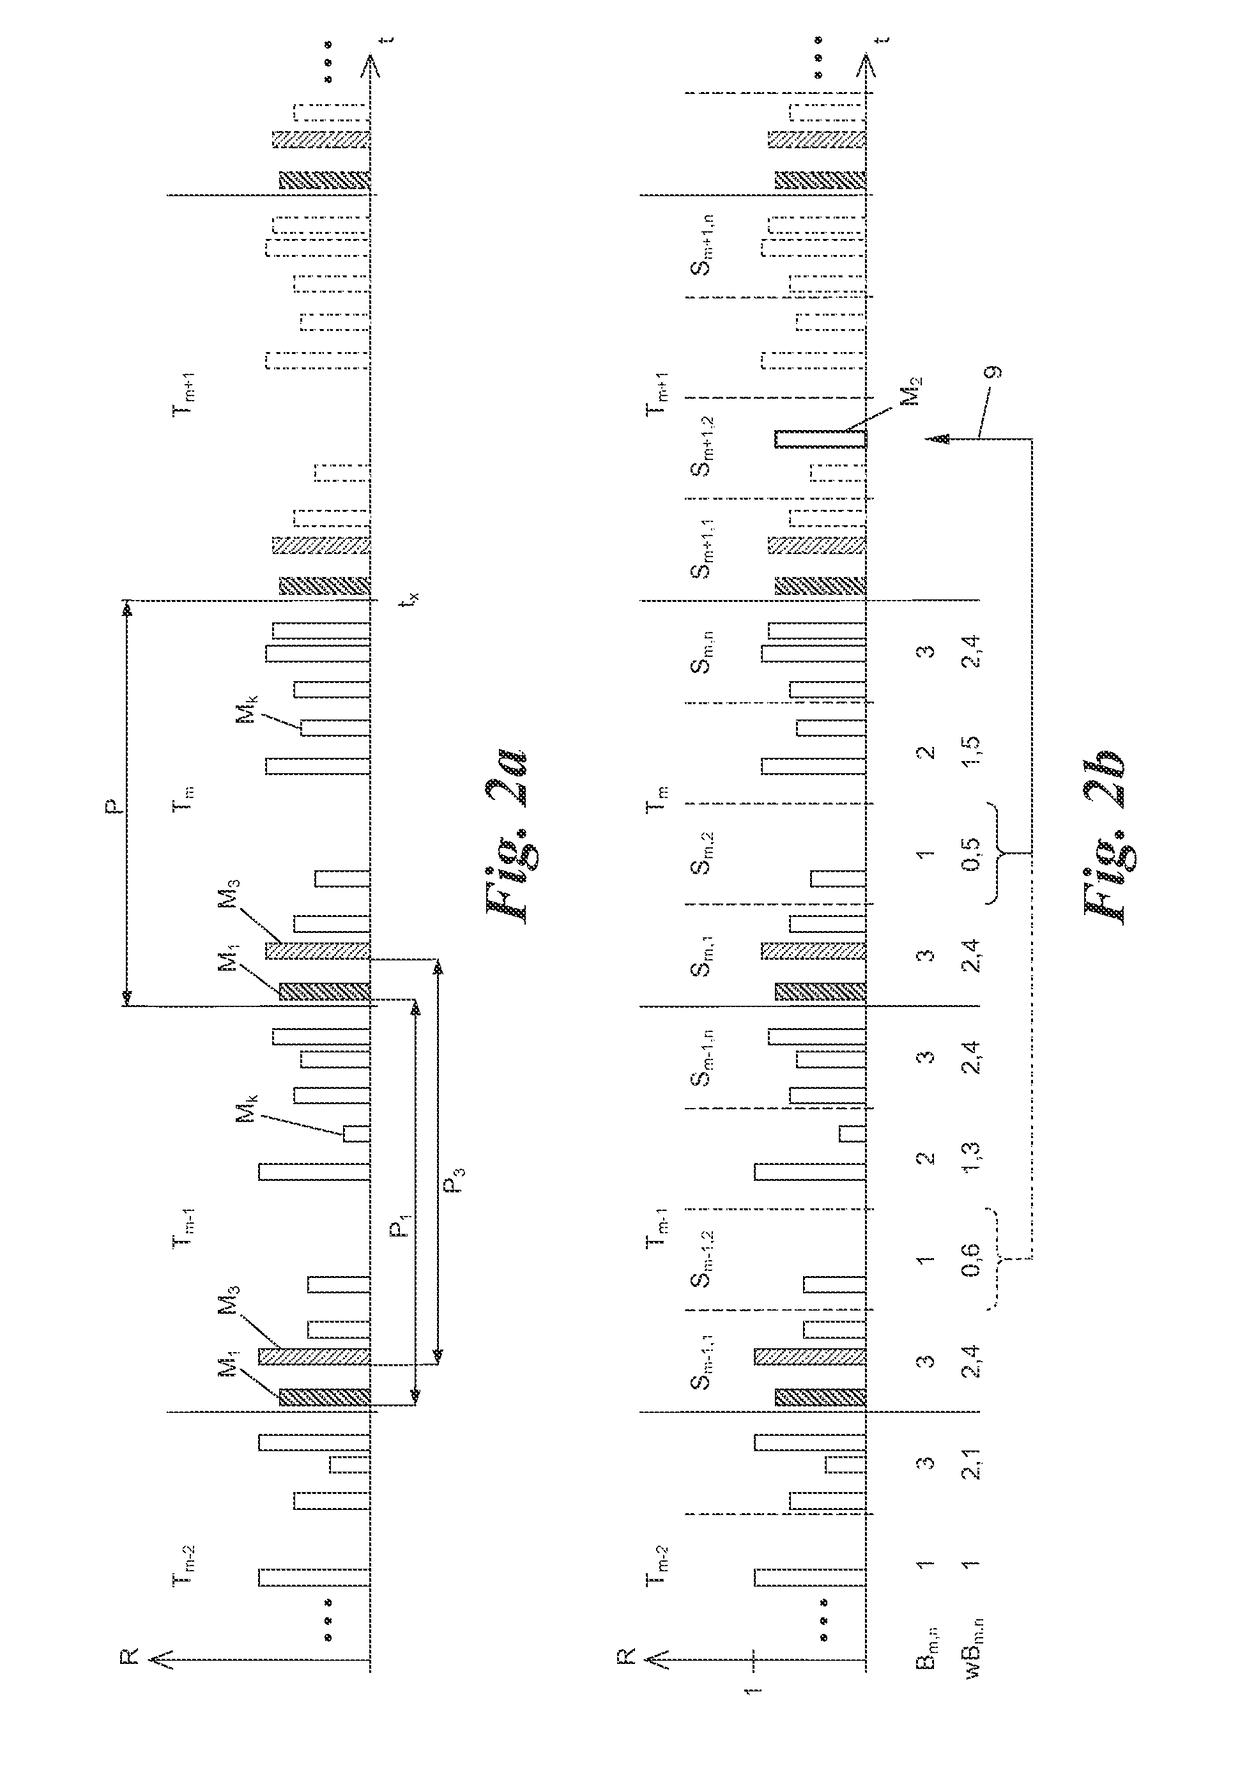 Method for transmitting messages in ad hoc networks